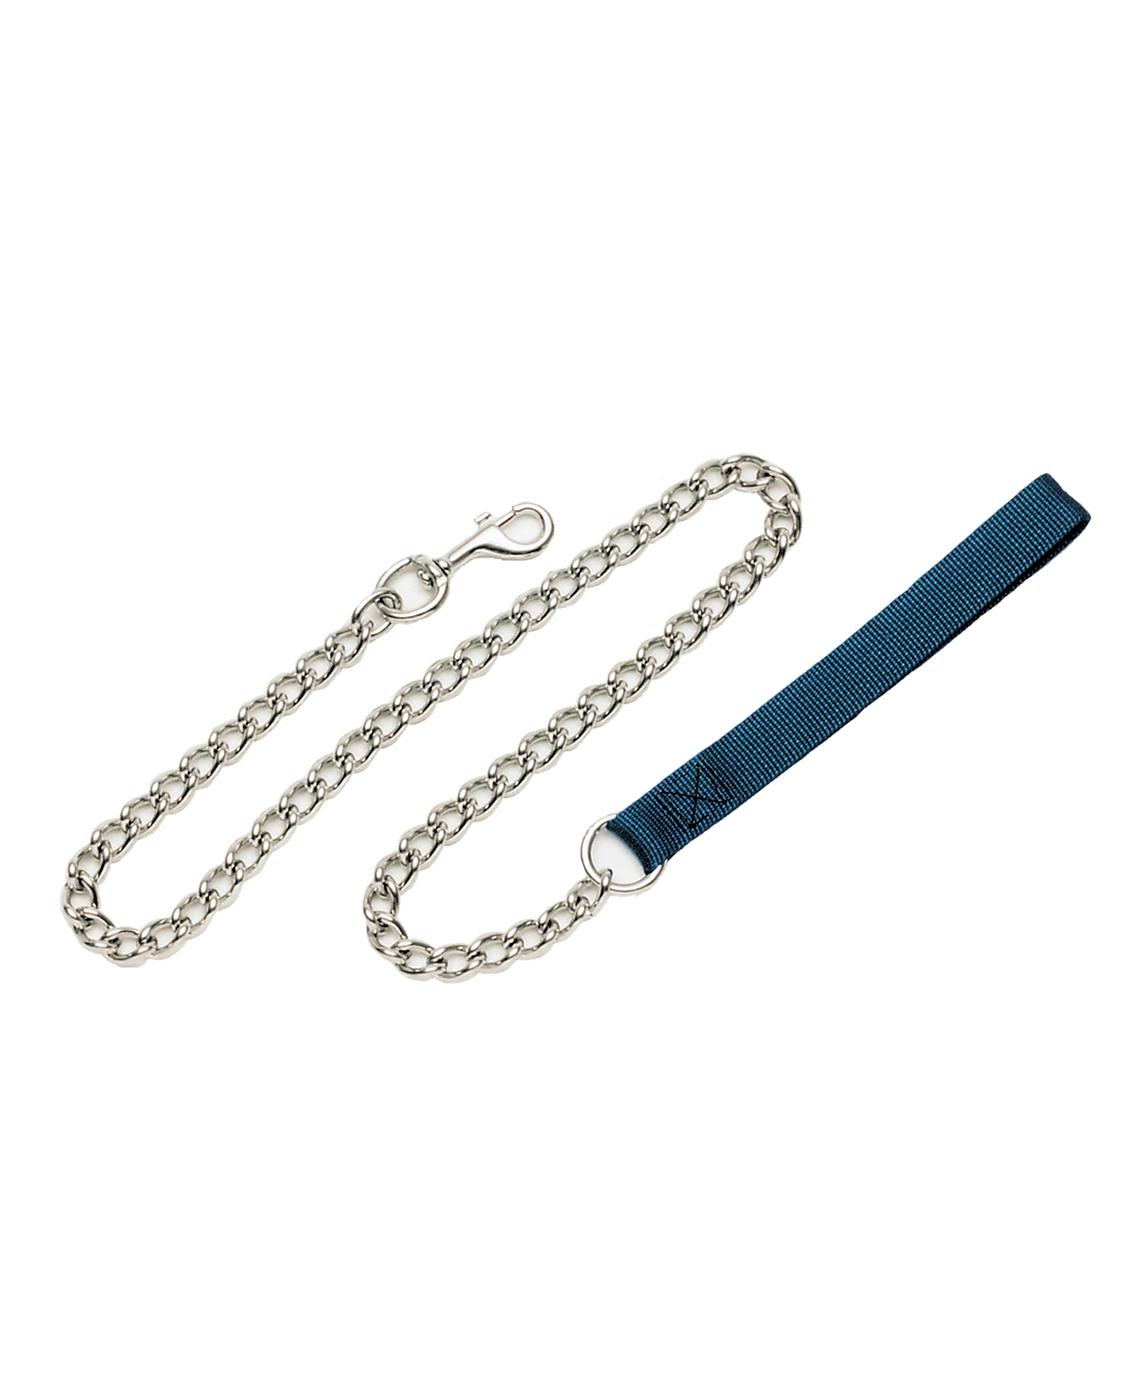 Coastal Pet Products Heavy Lead Chain, Assorted Colors; image 2 of 3